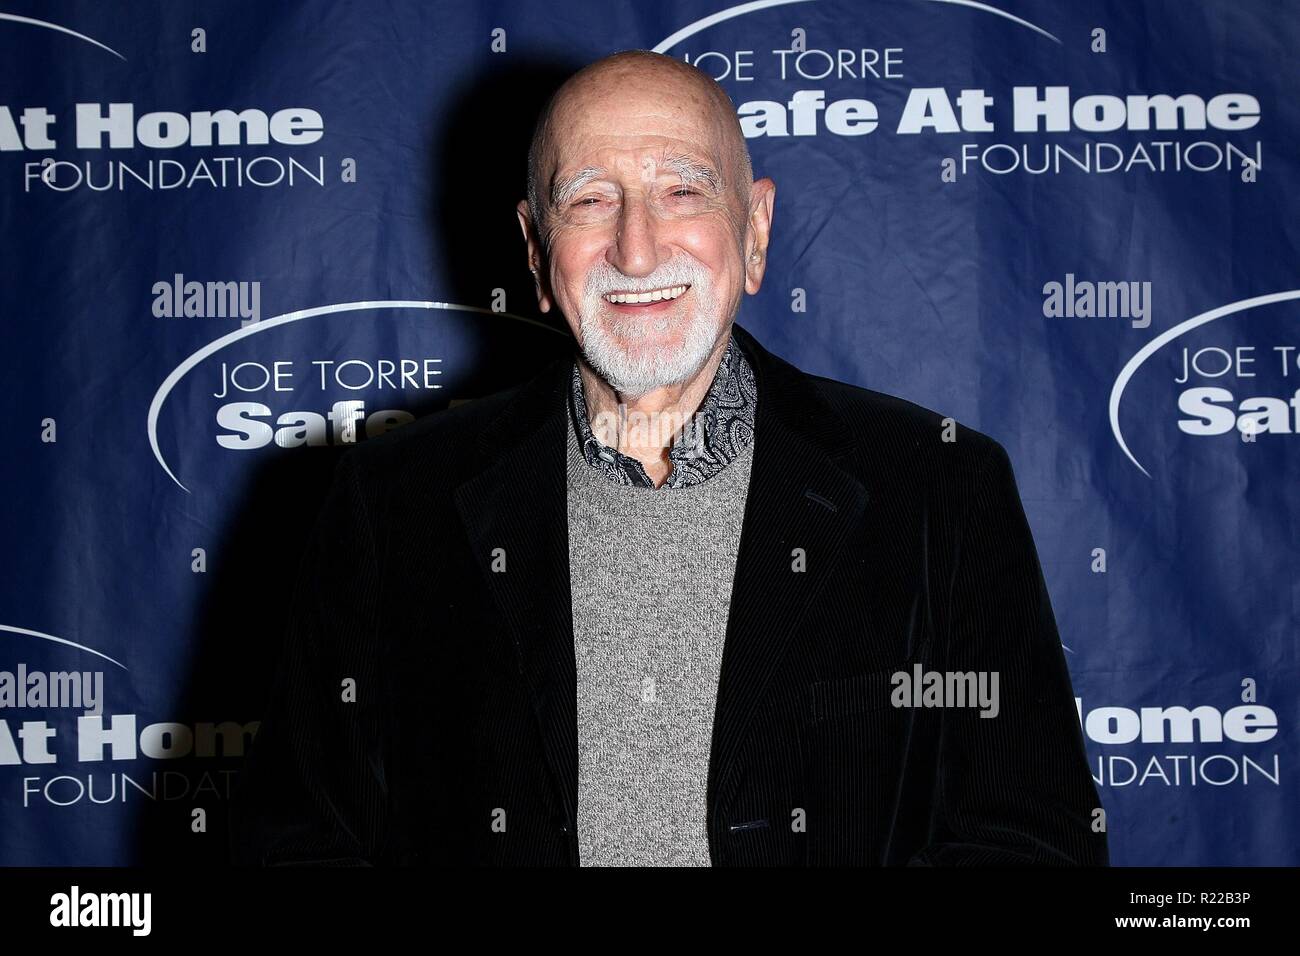 New York, NY, USA. 15th Nov, 2018. Dominic Chianese at arrivals for The Joe Torre Safe At Home Foundation 16th Annual Gala, Cipriani 25 Broadway, New York, NY November 15, 2018. Credit: Steve Mack/Everett Collection/Alamy Live News Stock Photo